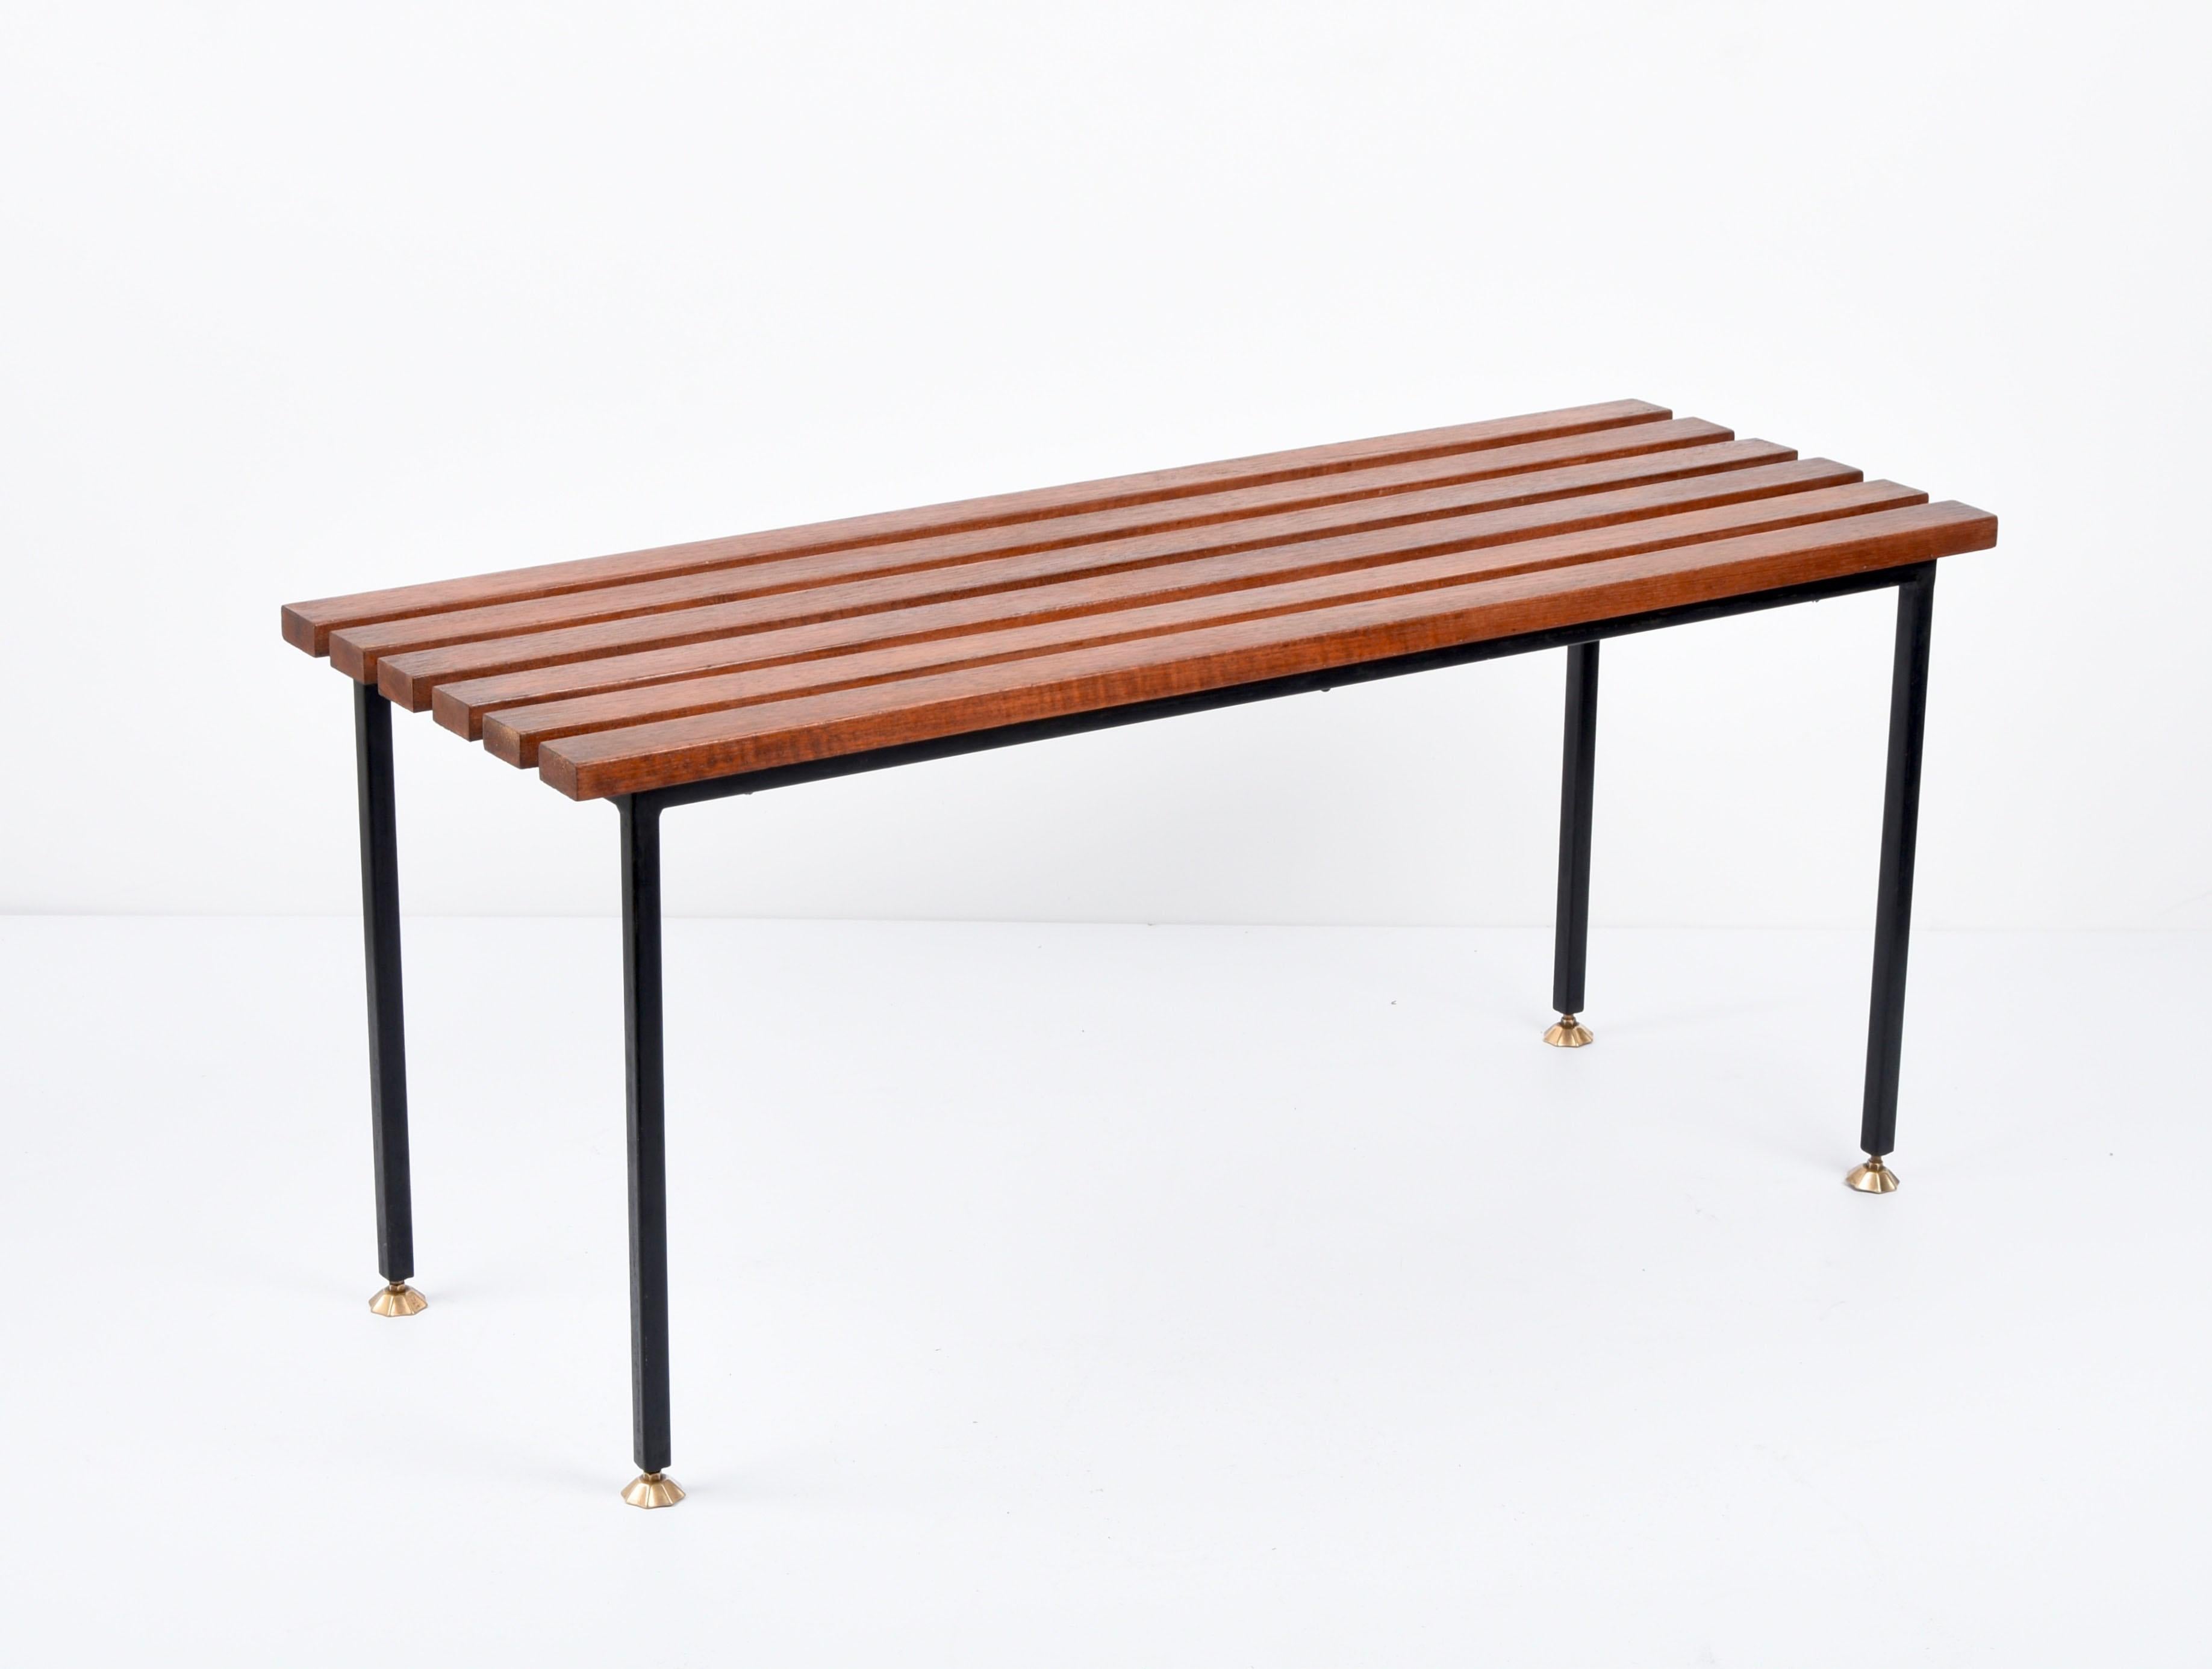 Midcentury Teak and Black Enameled Metal Italian Bench with Brass Feet, 1960s For Sale 3